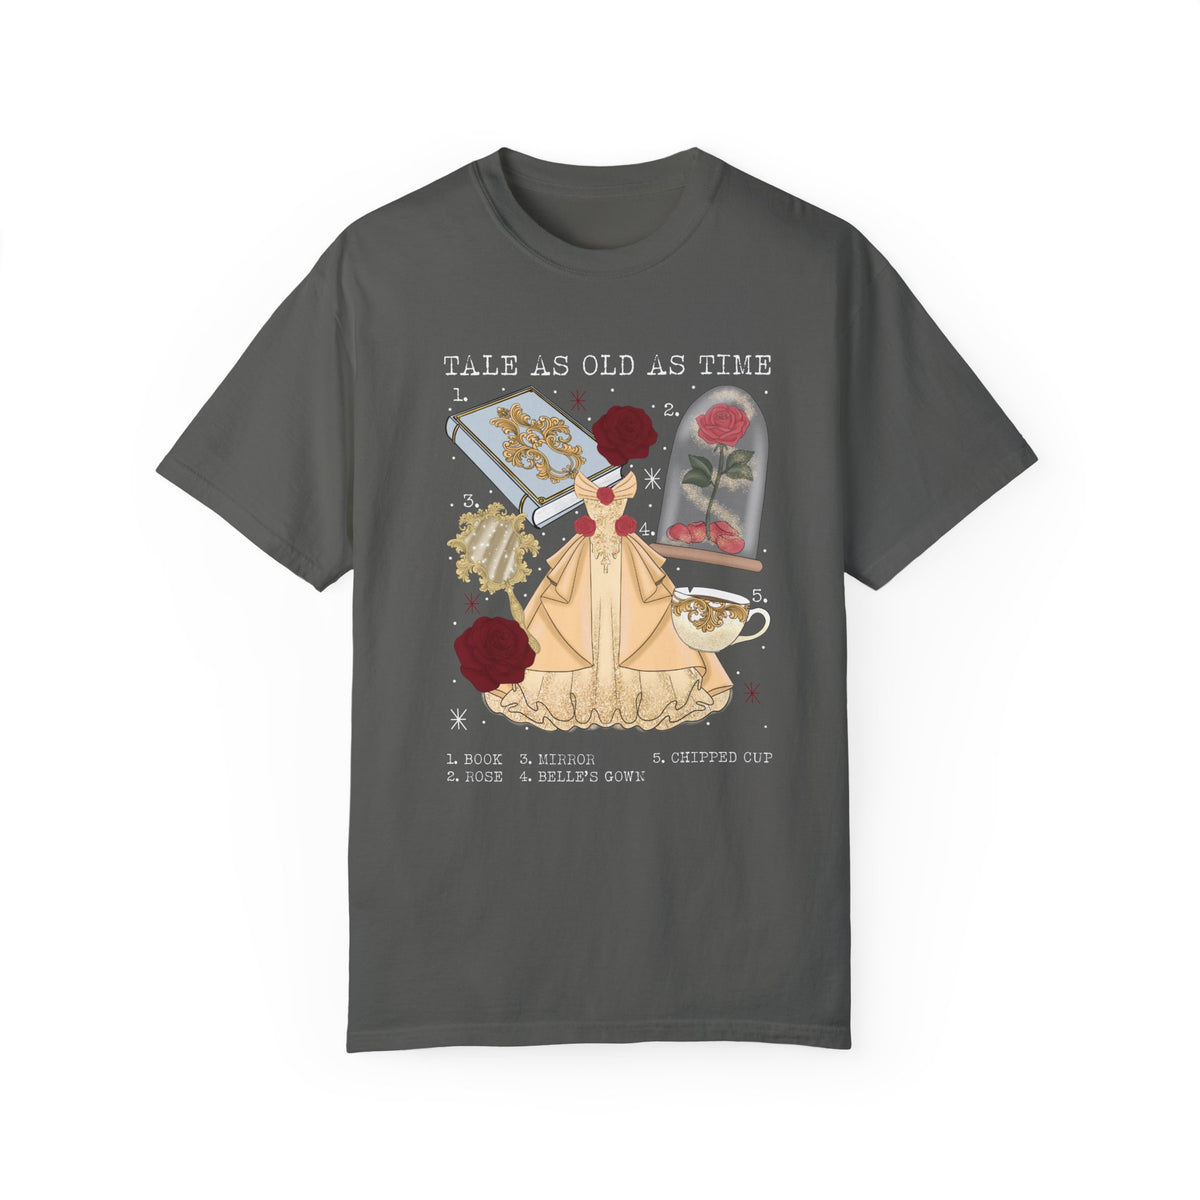 Tale As Old As Time Comfort Colors Unisex Garment-Dyed T-shirt